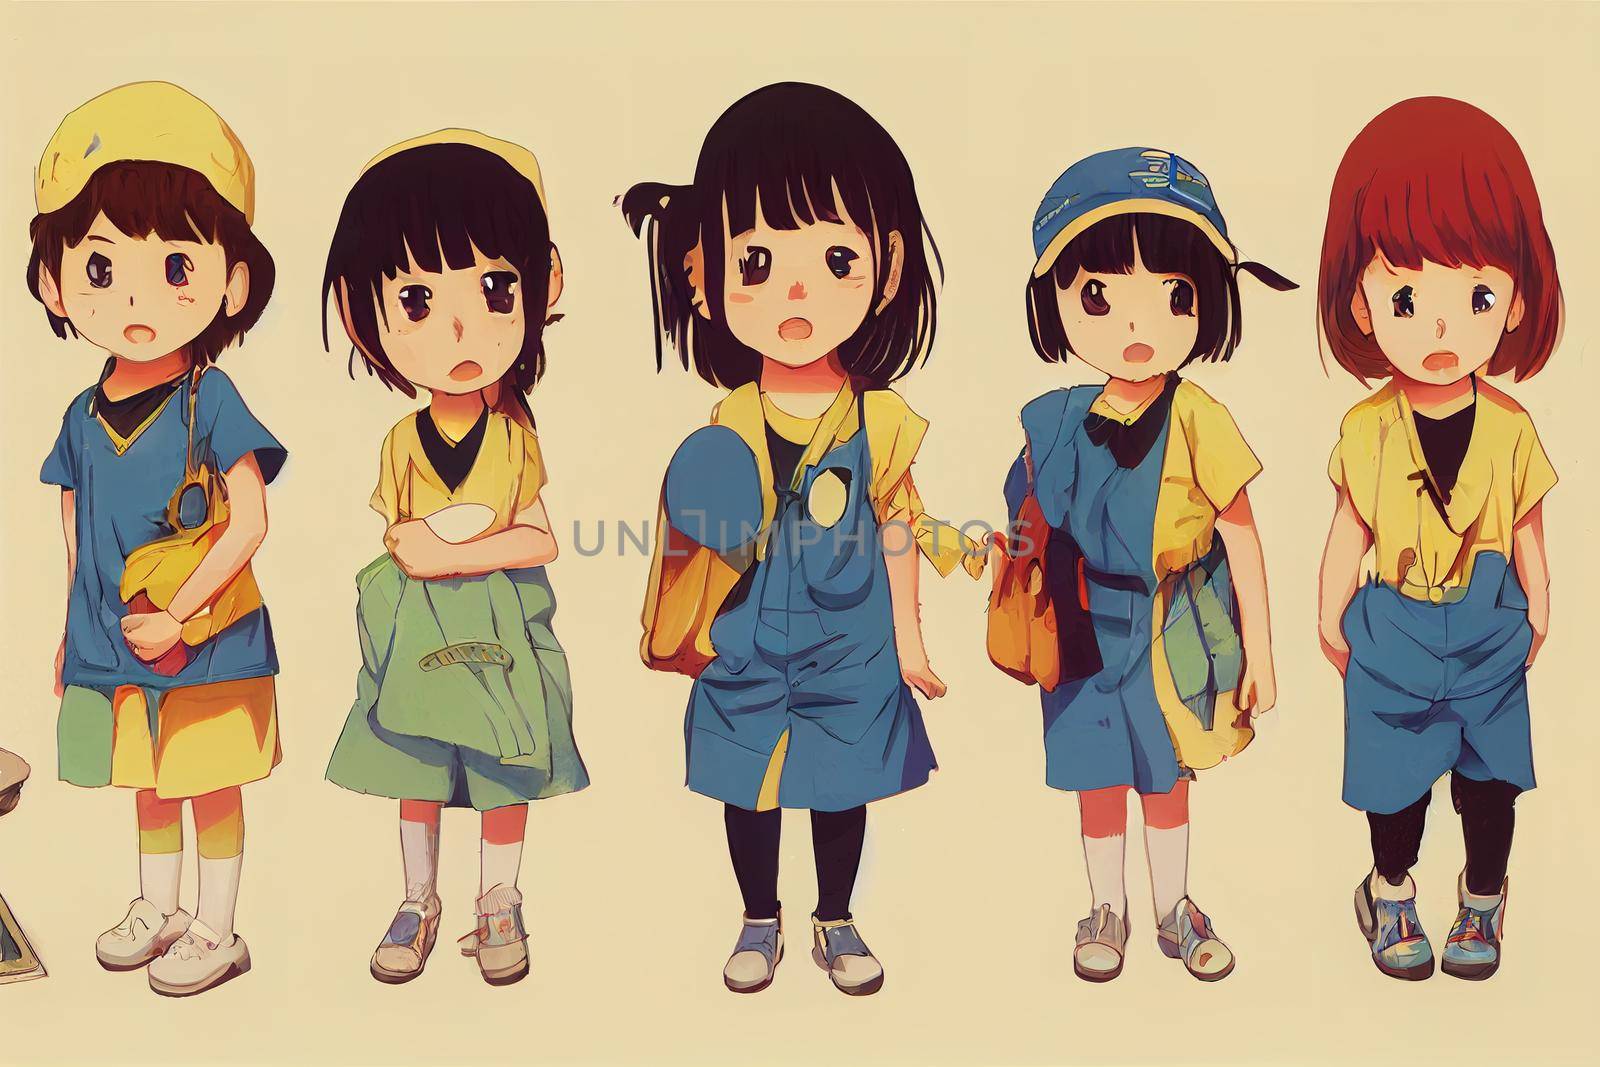 Child Care Workers ,Anime style illustration V1 High quality 2d illustration